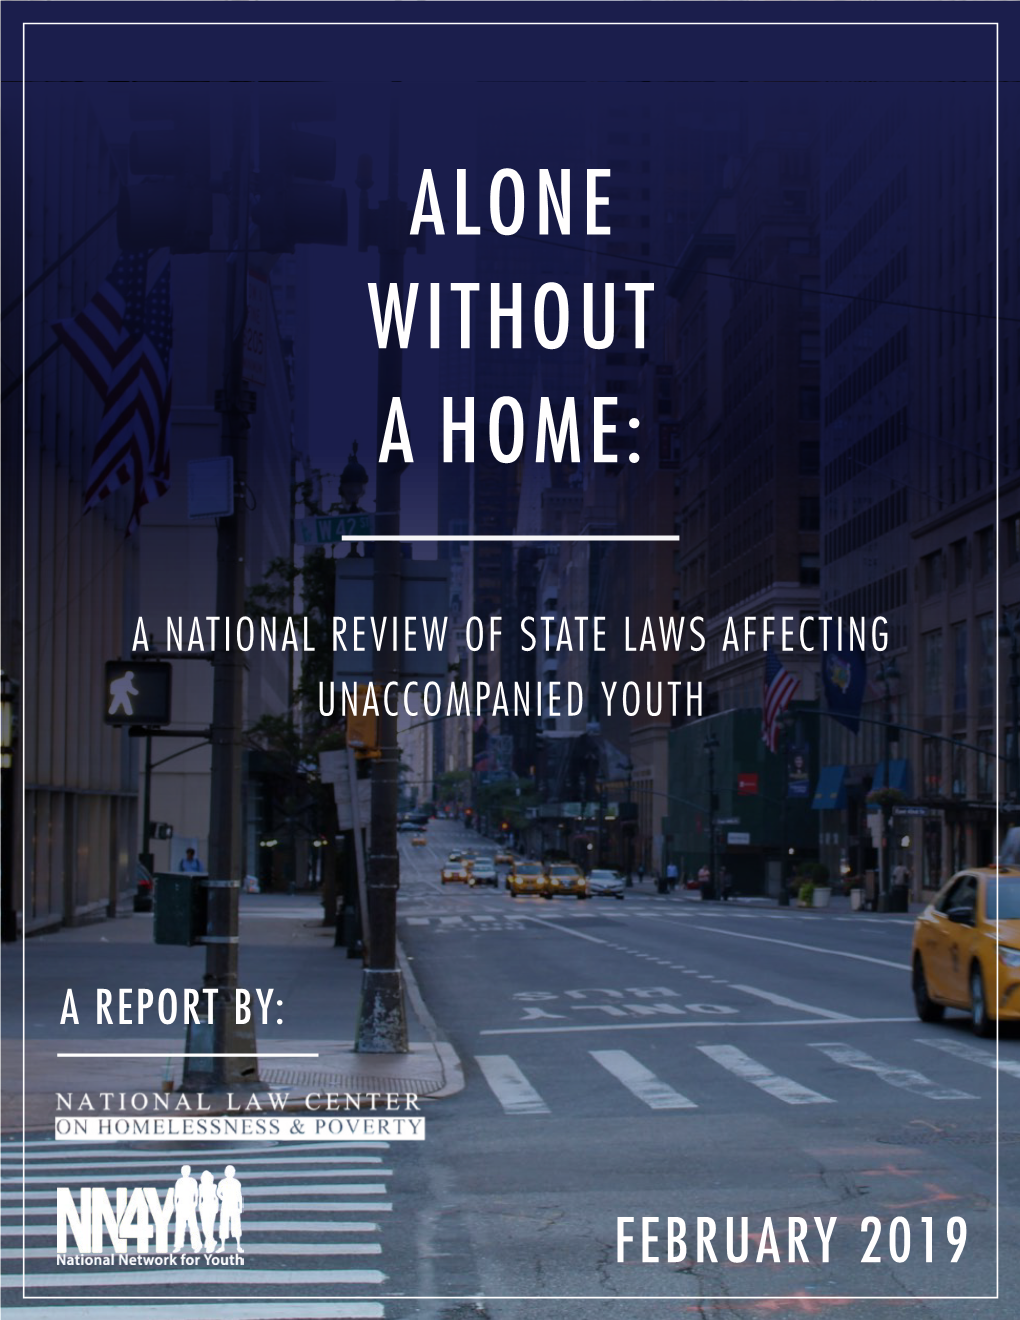 Alone Without a Home: a National Review of State Laws Affecting Unaccompanied Youth